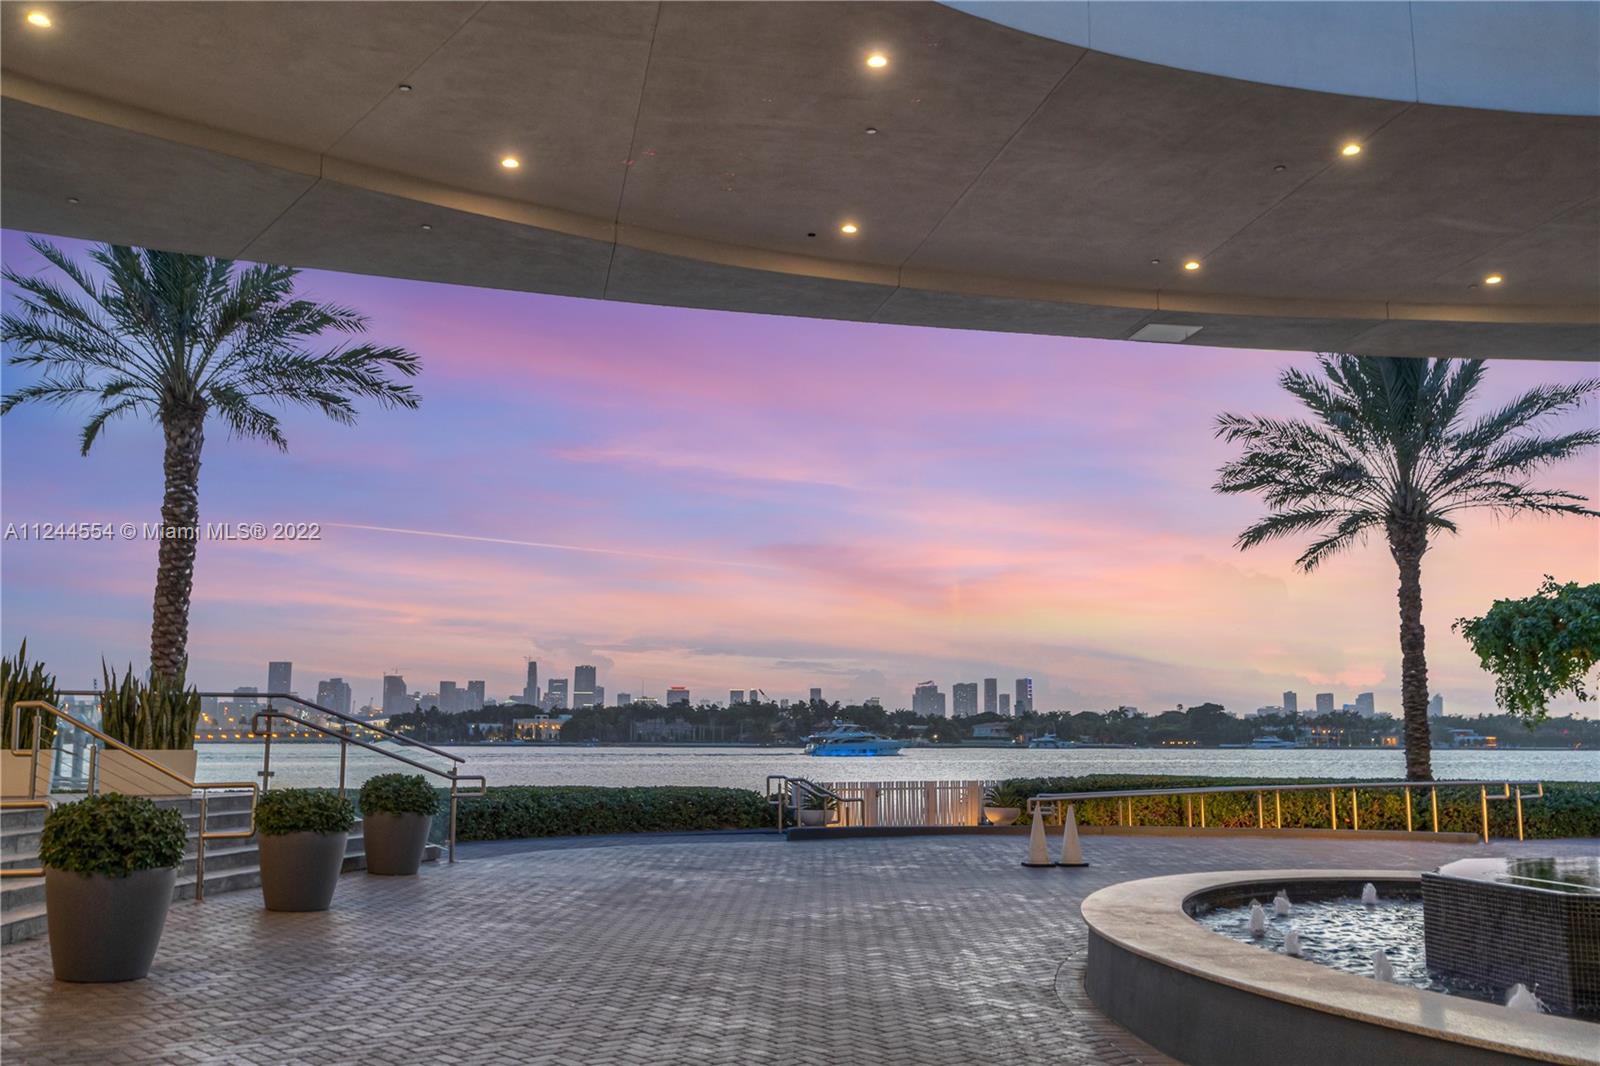 This stunning newly renovated 3bd /3.5br luxury unit caters to spectacular views of the Miami bay, d